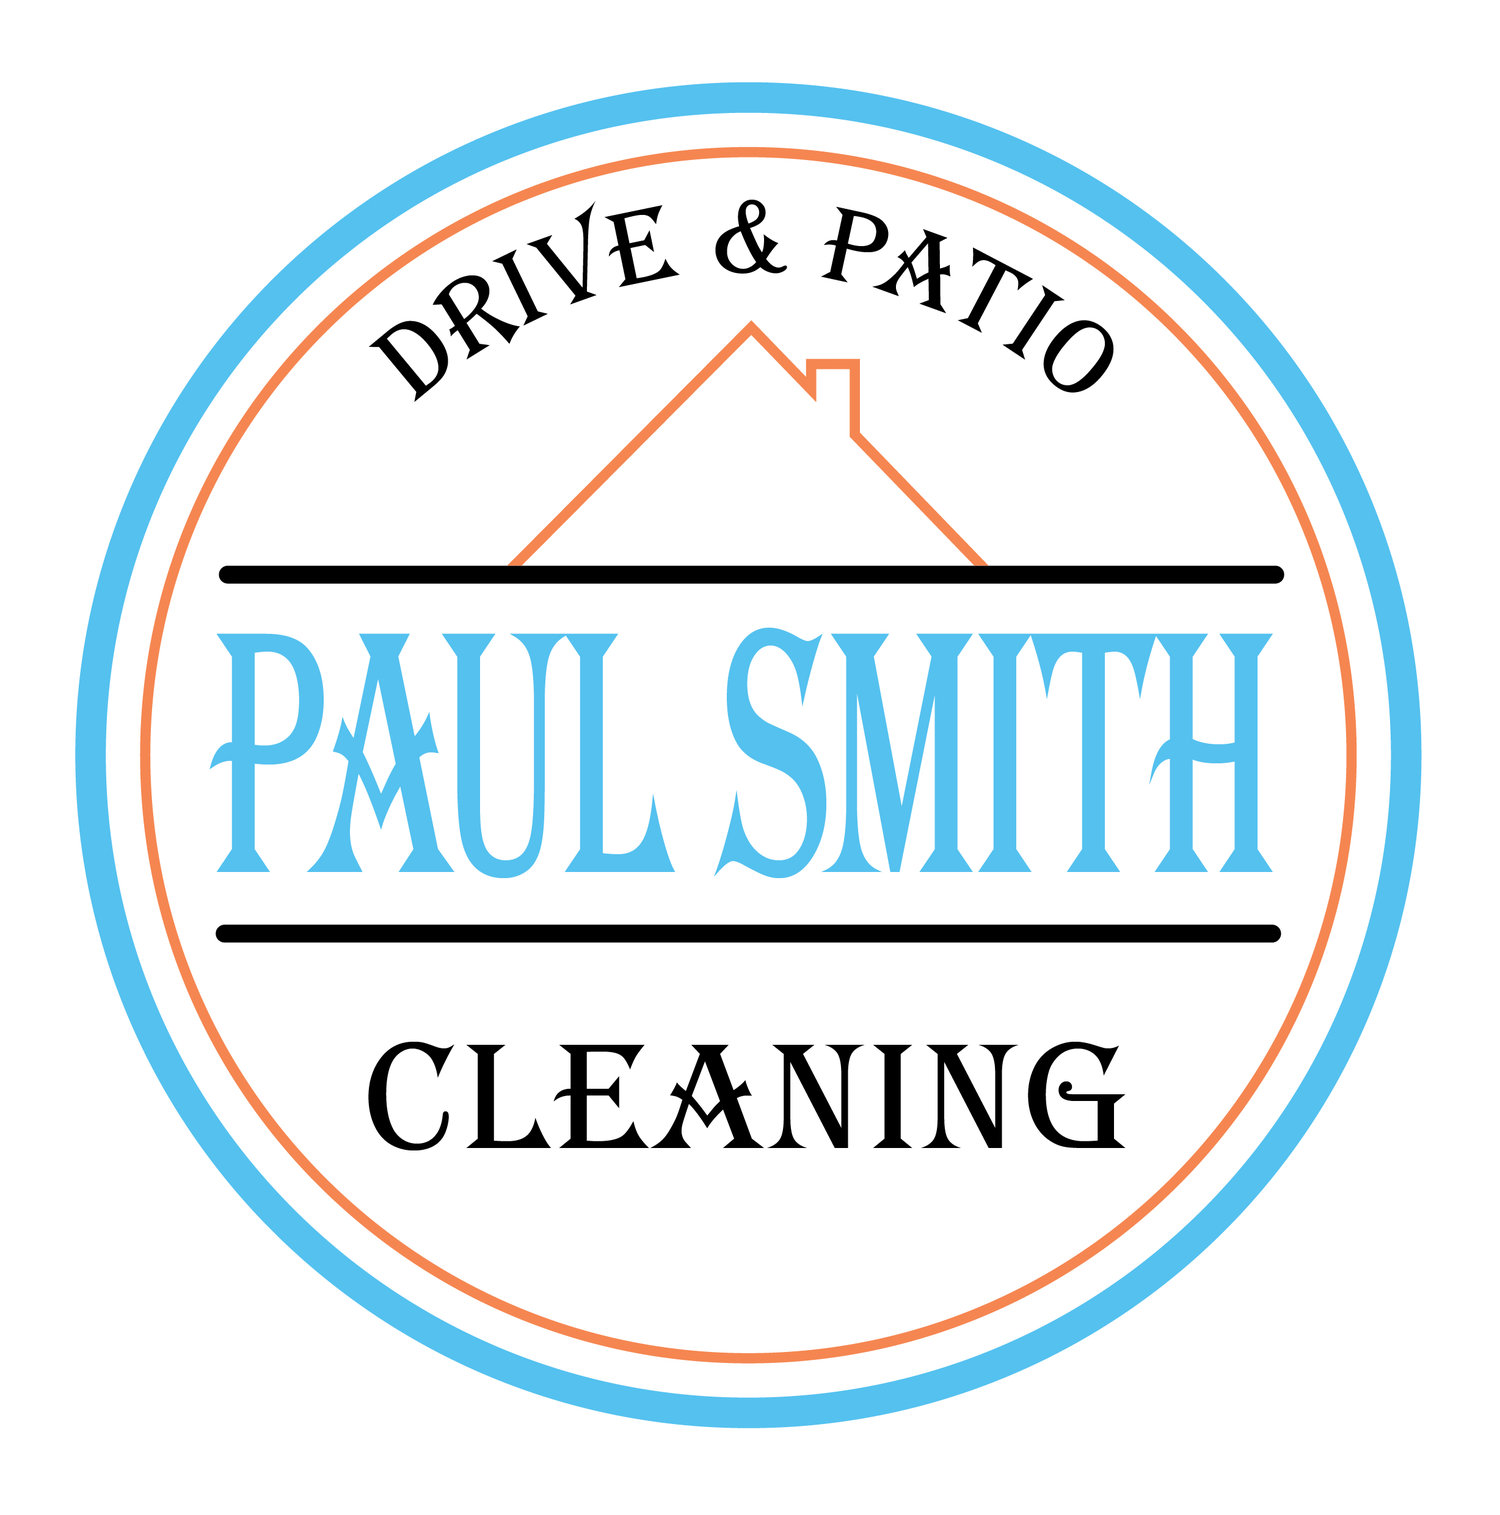 Paul Smith Drive and Patio Cleaning